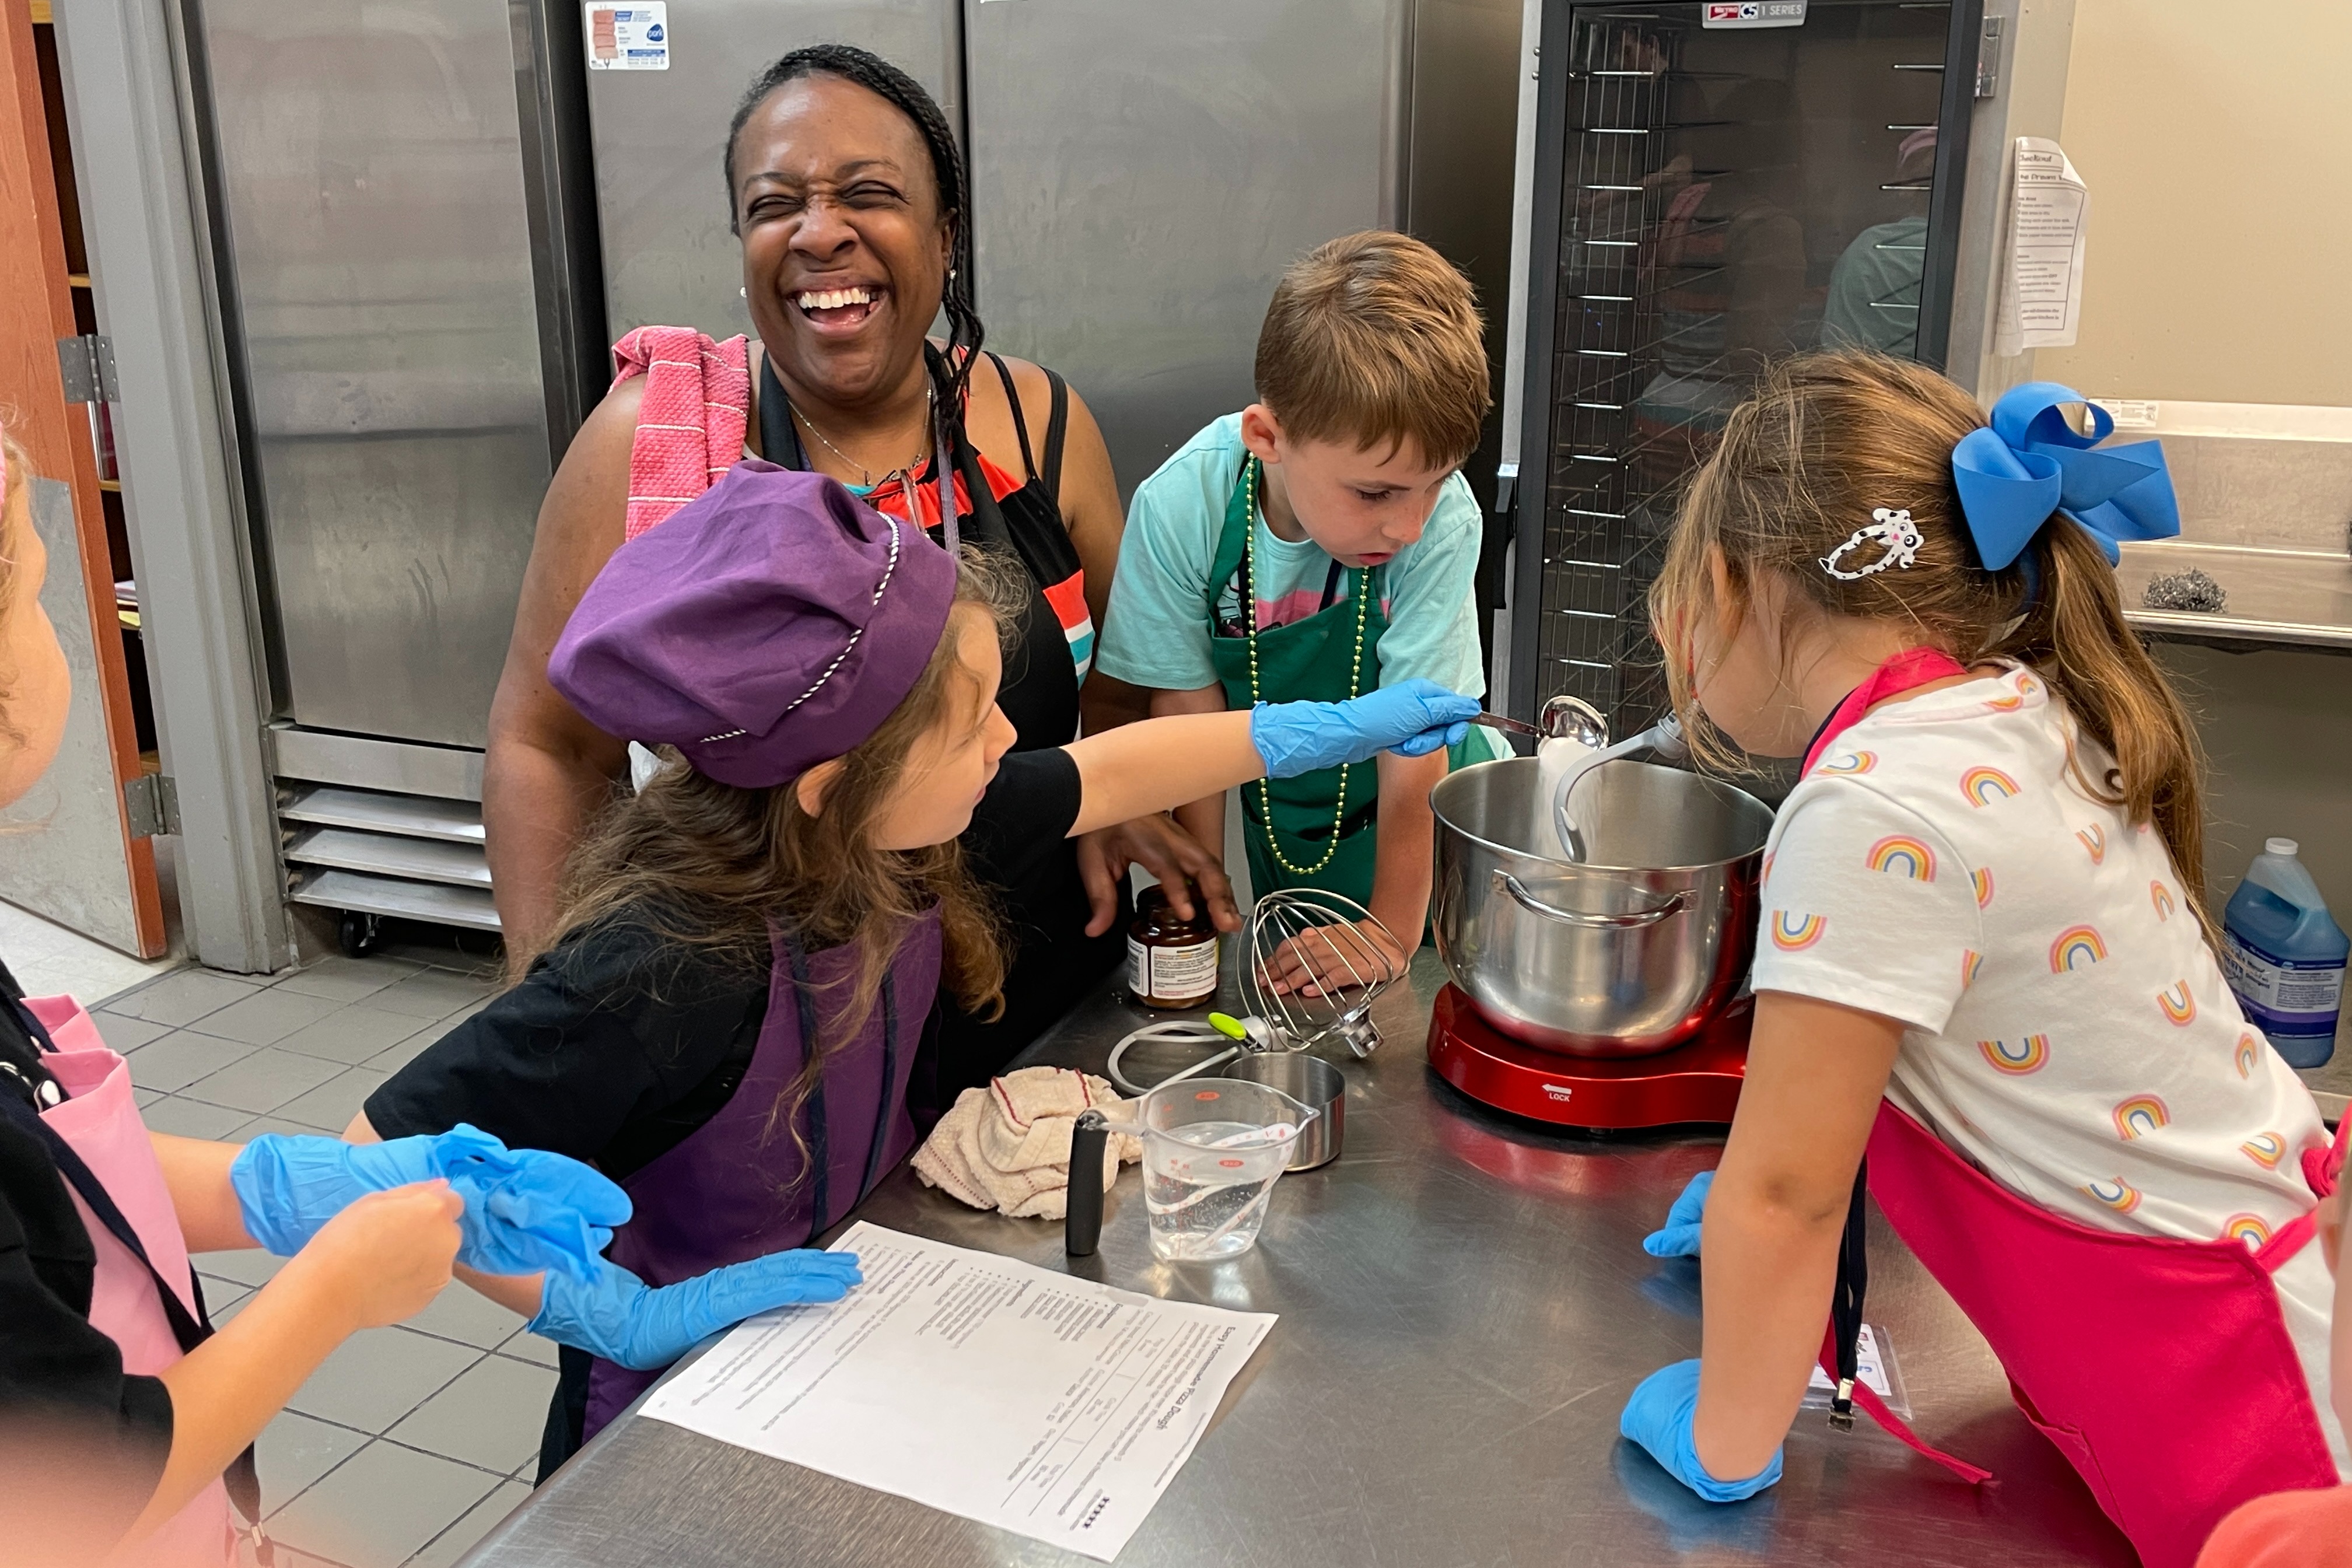 Culinary camp students work together to make pizza dough